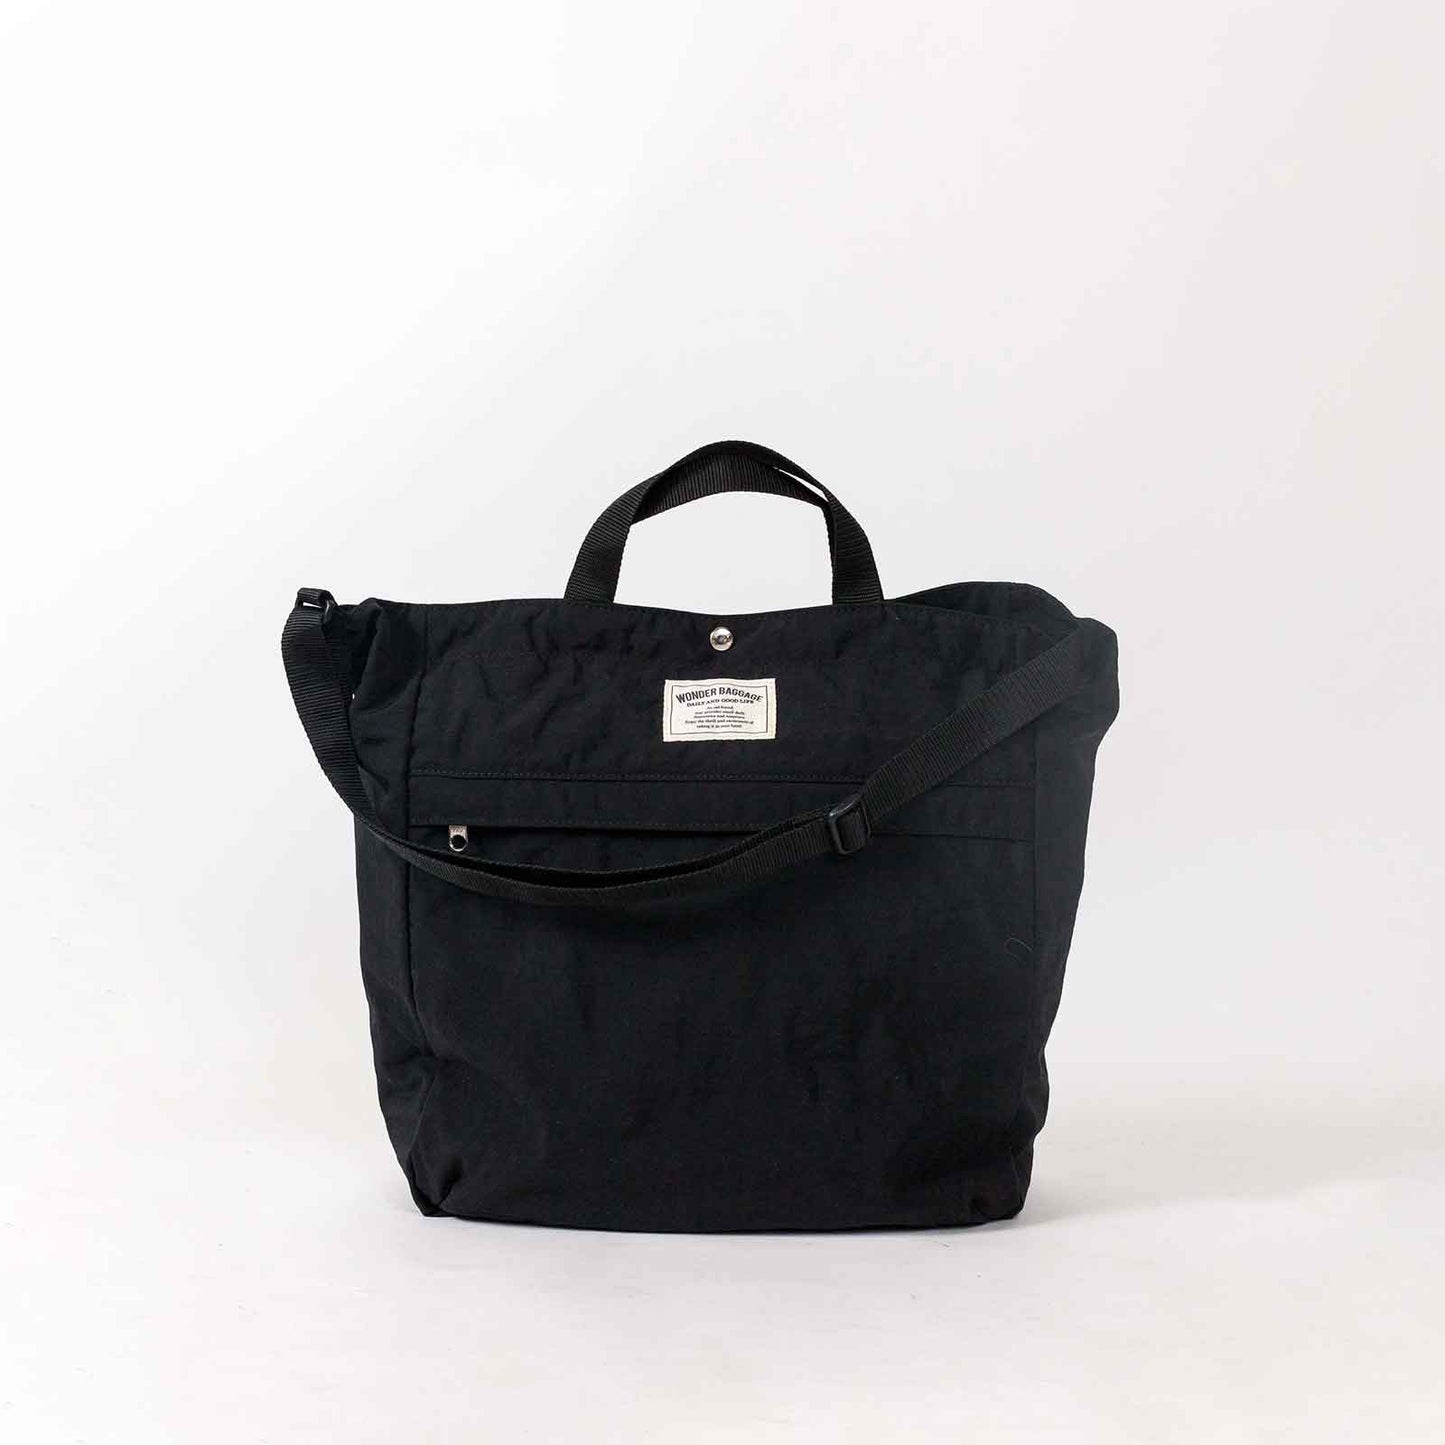 RELAX TOTE